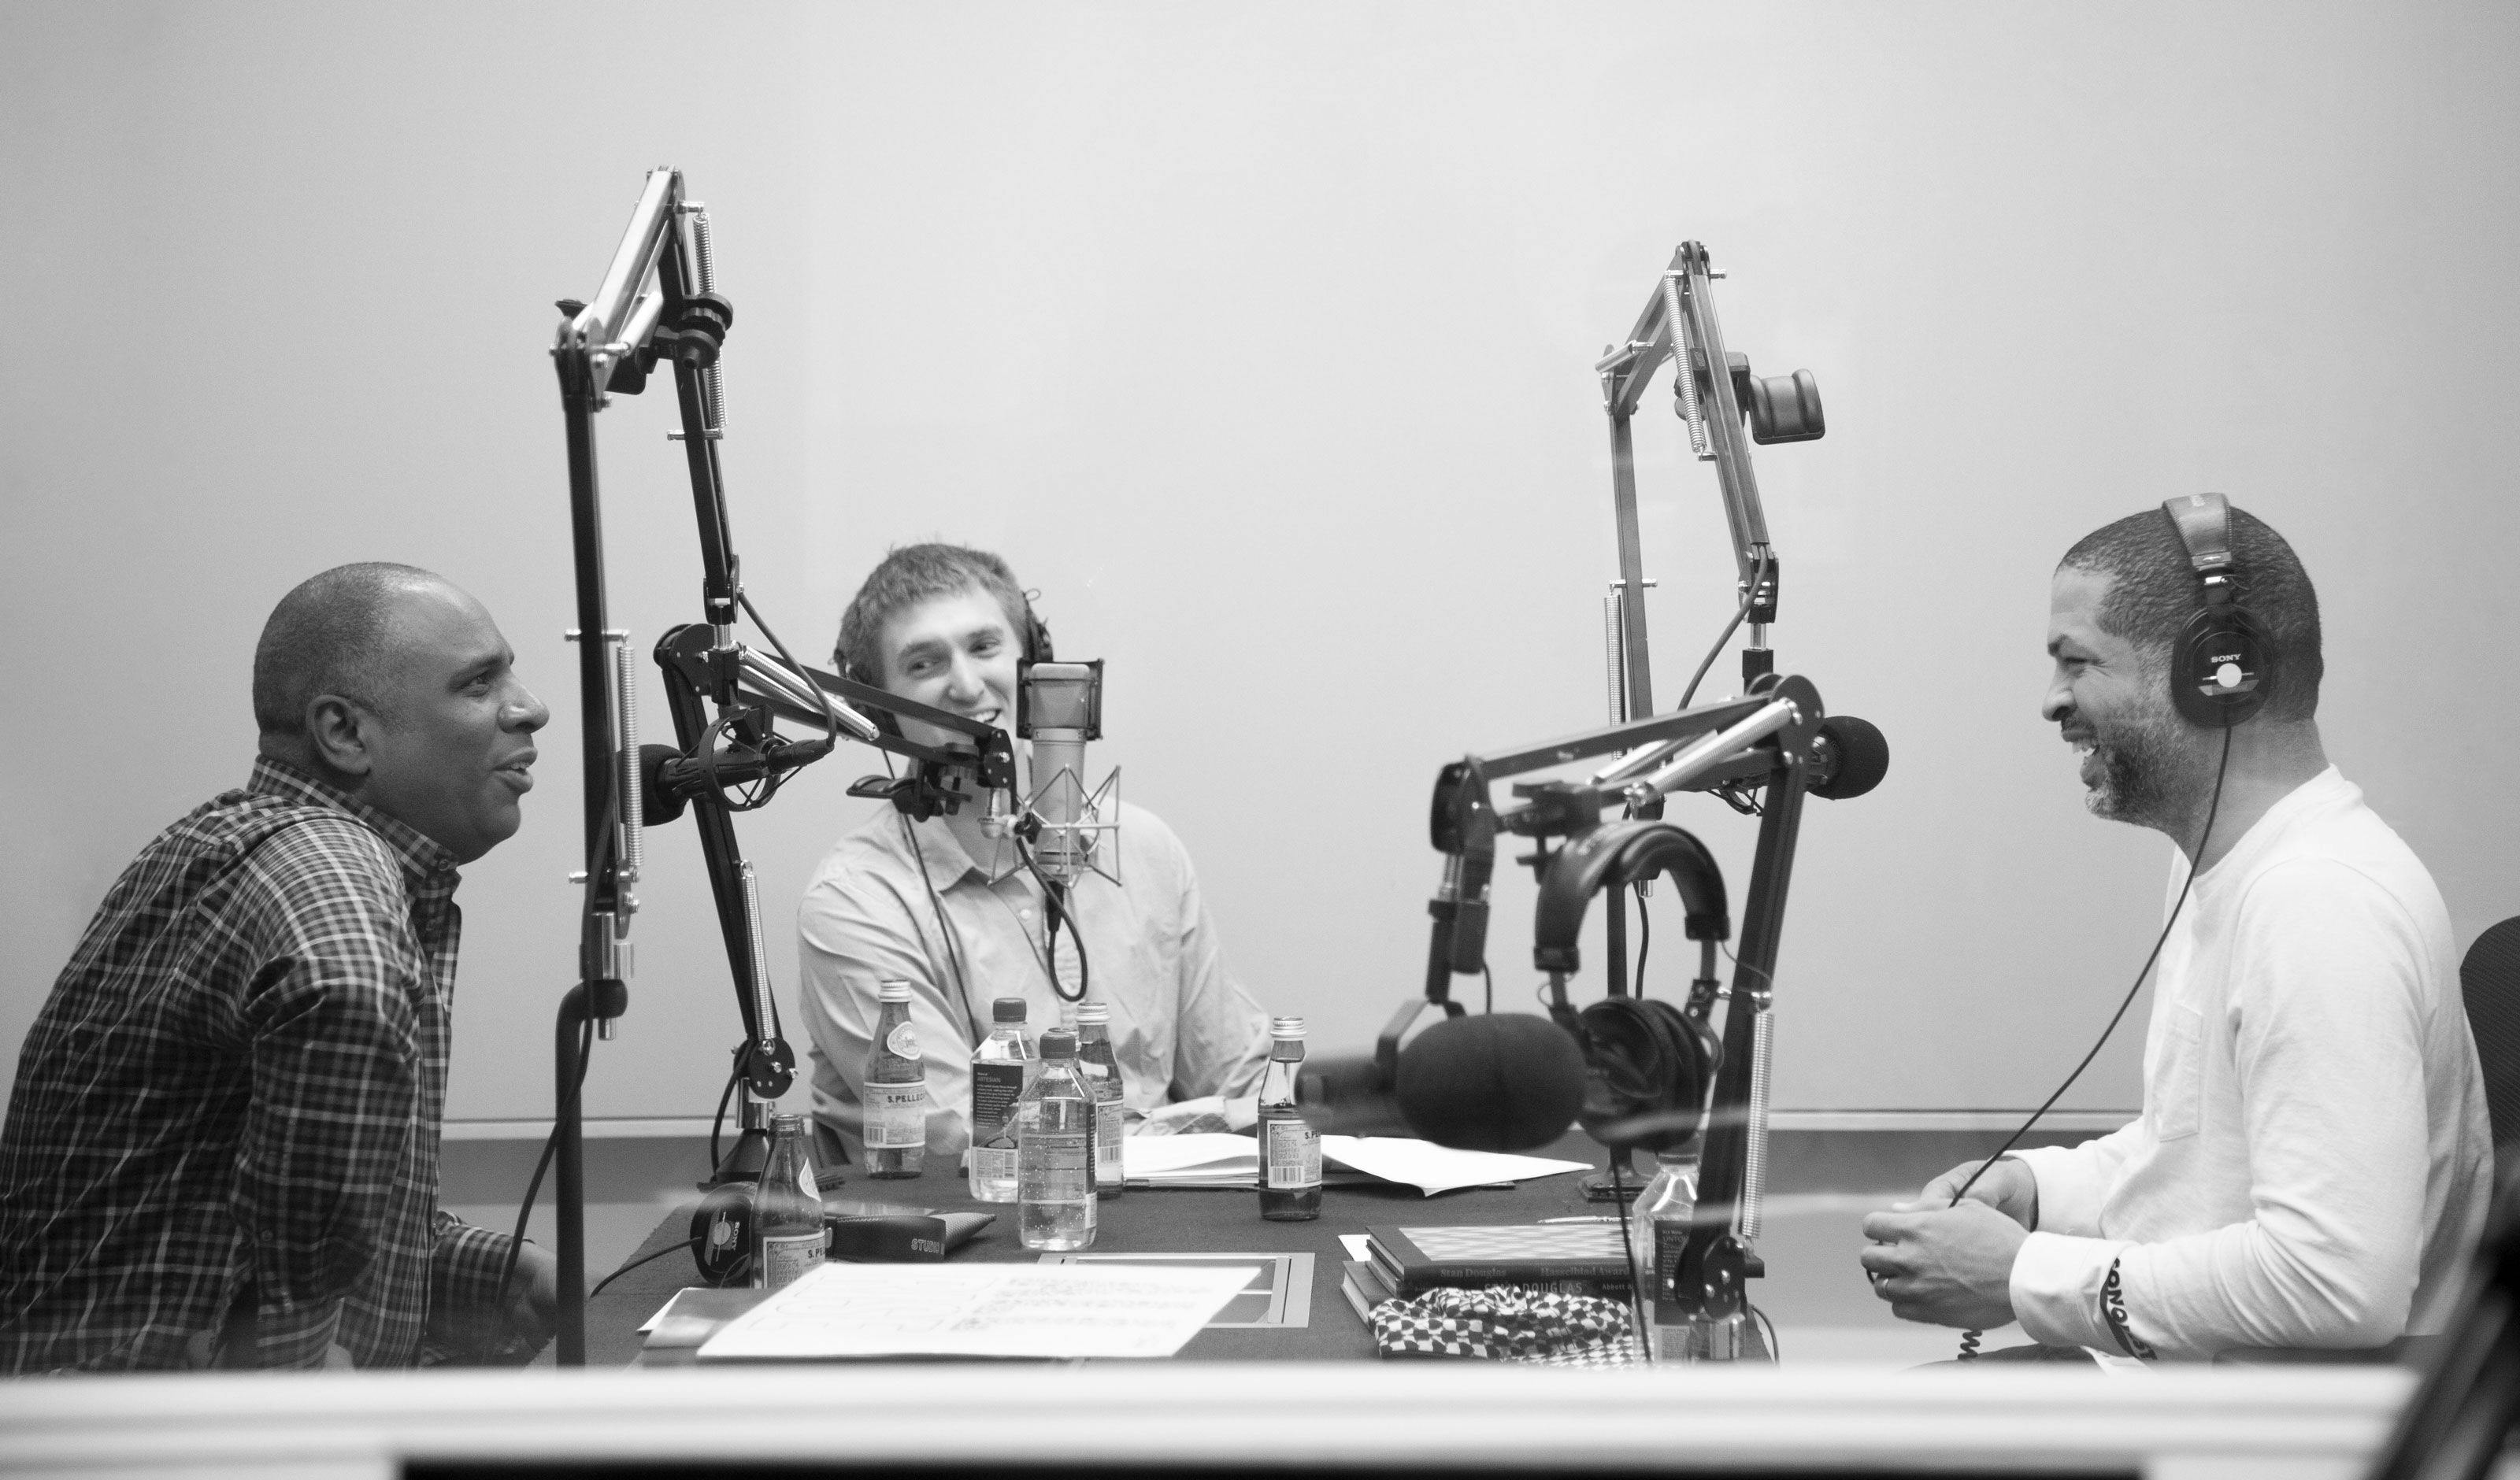 A photograph of Stan Douglas, Lucas Zwirner, and Jason Moran recording Dialogues in New York, dated 2018.